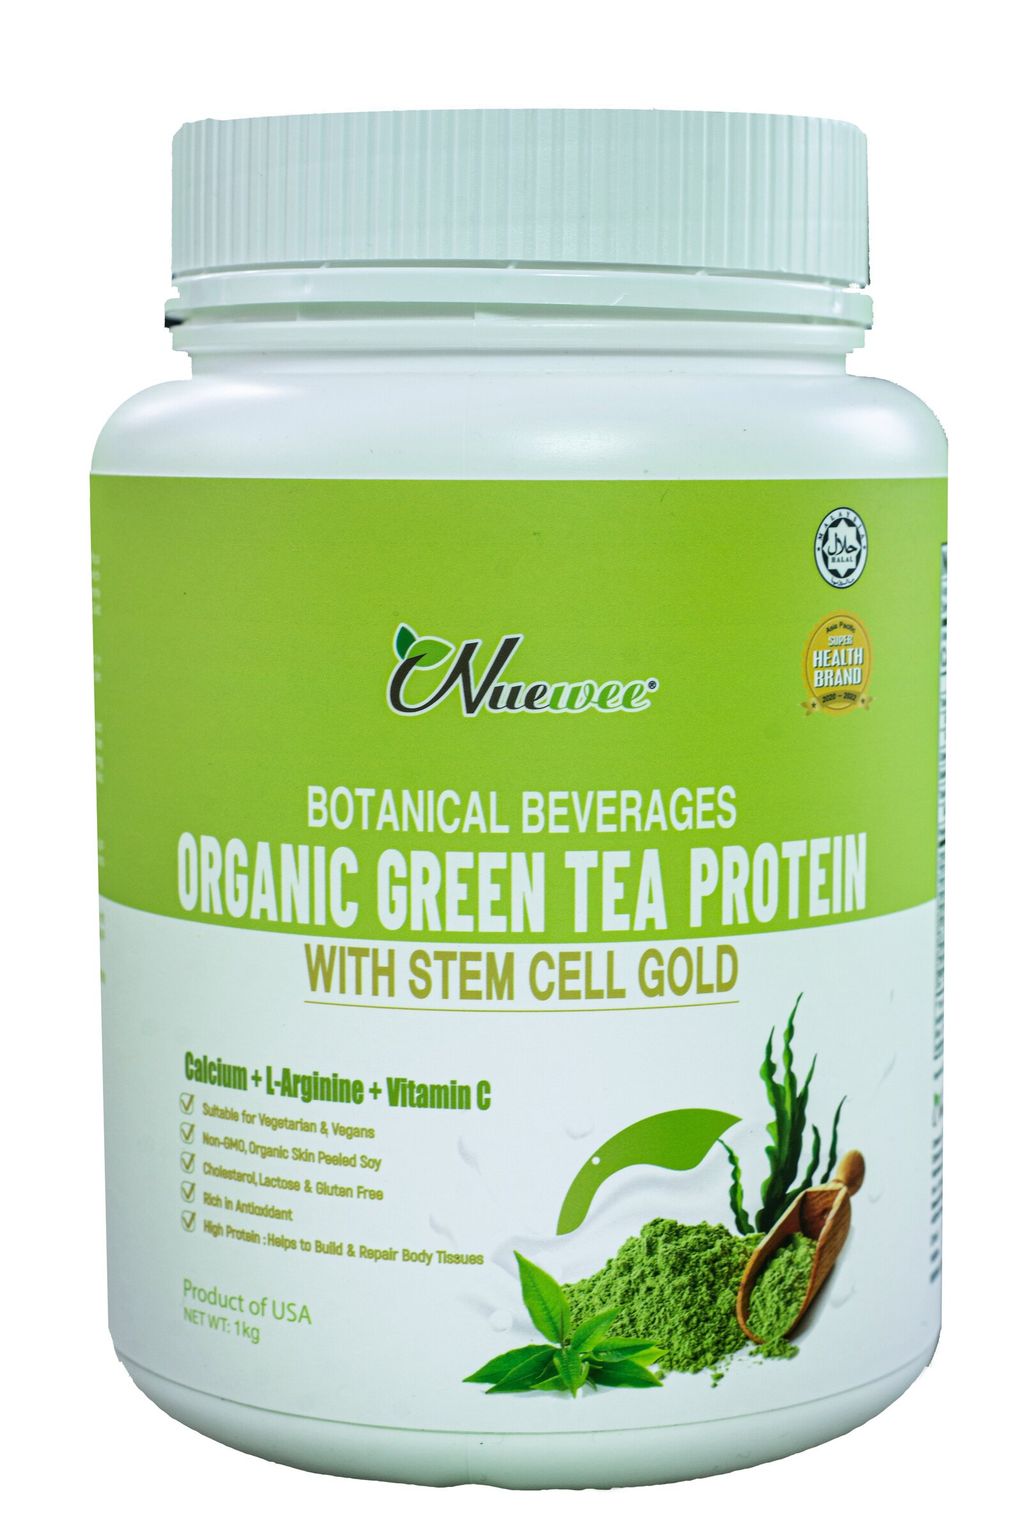 Nuewee-Organic-Green-Tea-Protein-with-Stem-Cell(1kg)